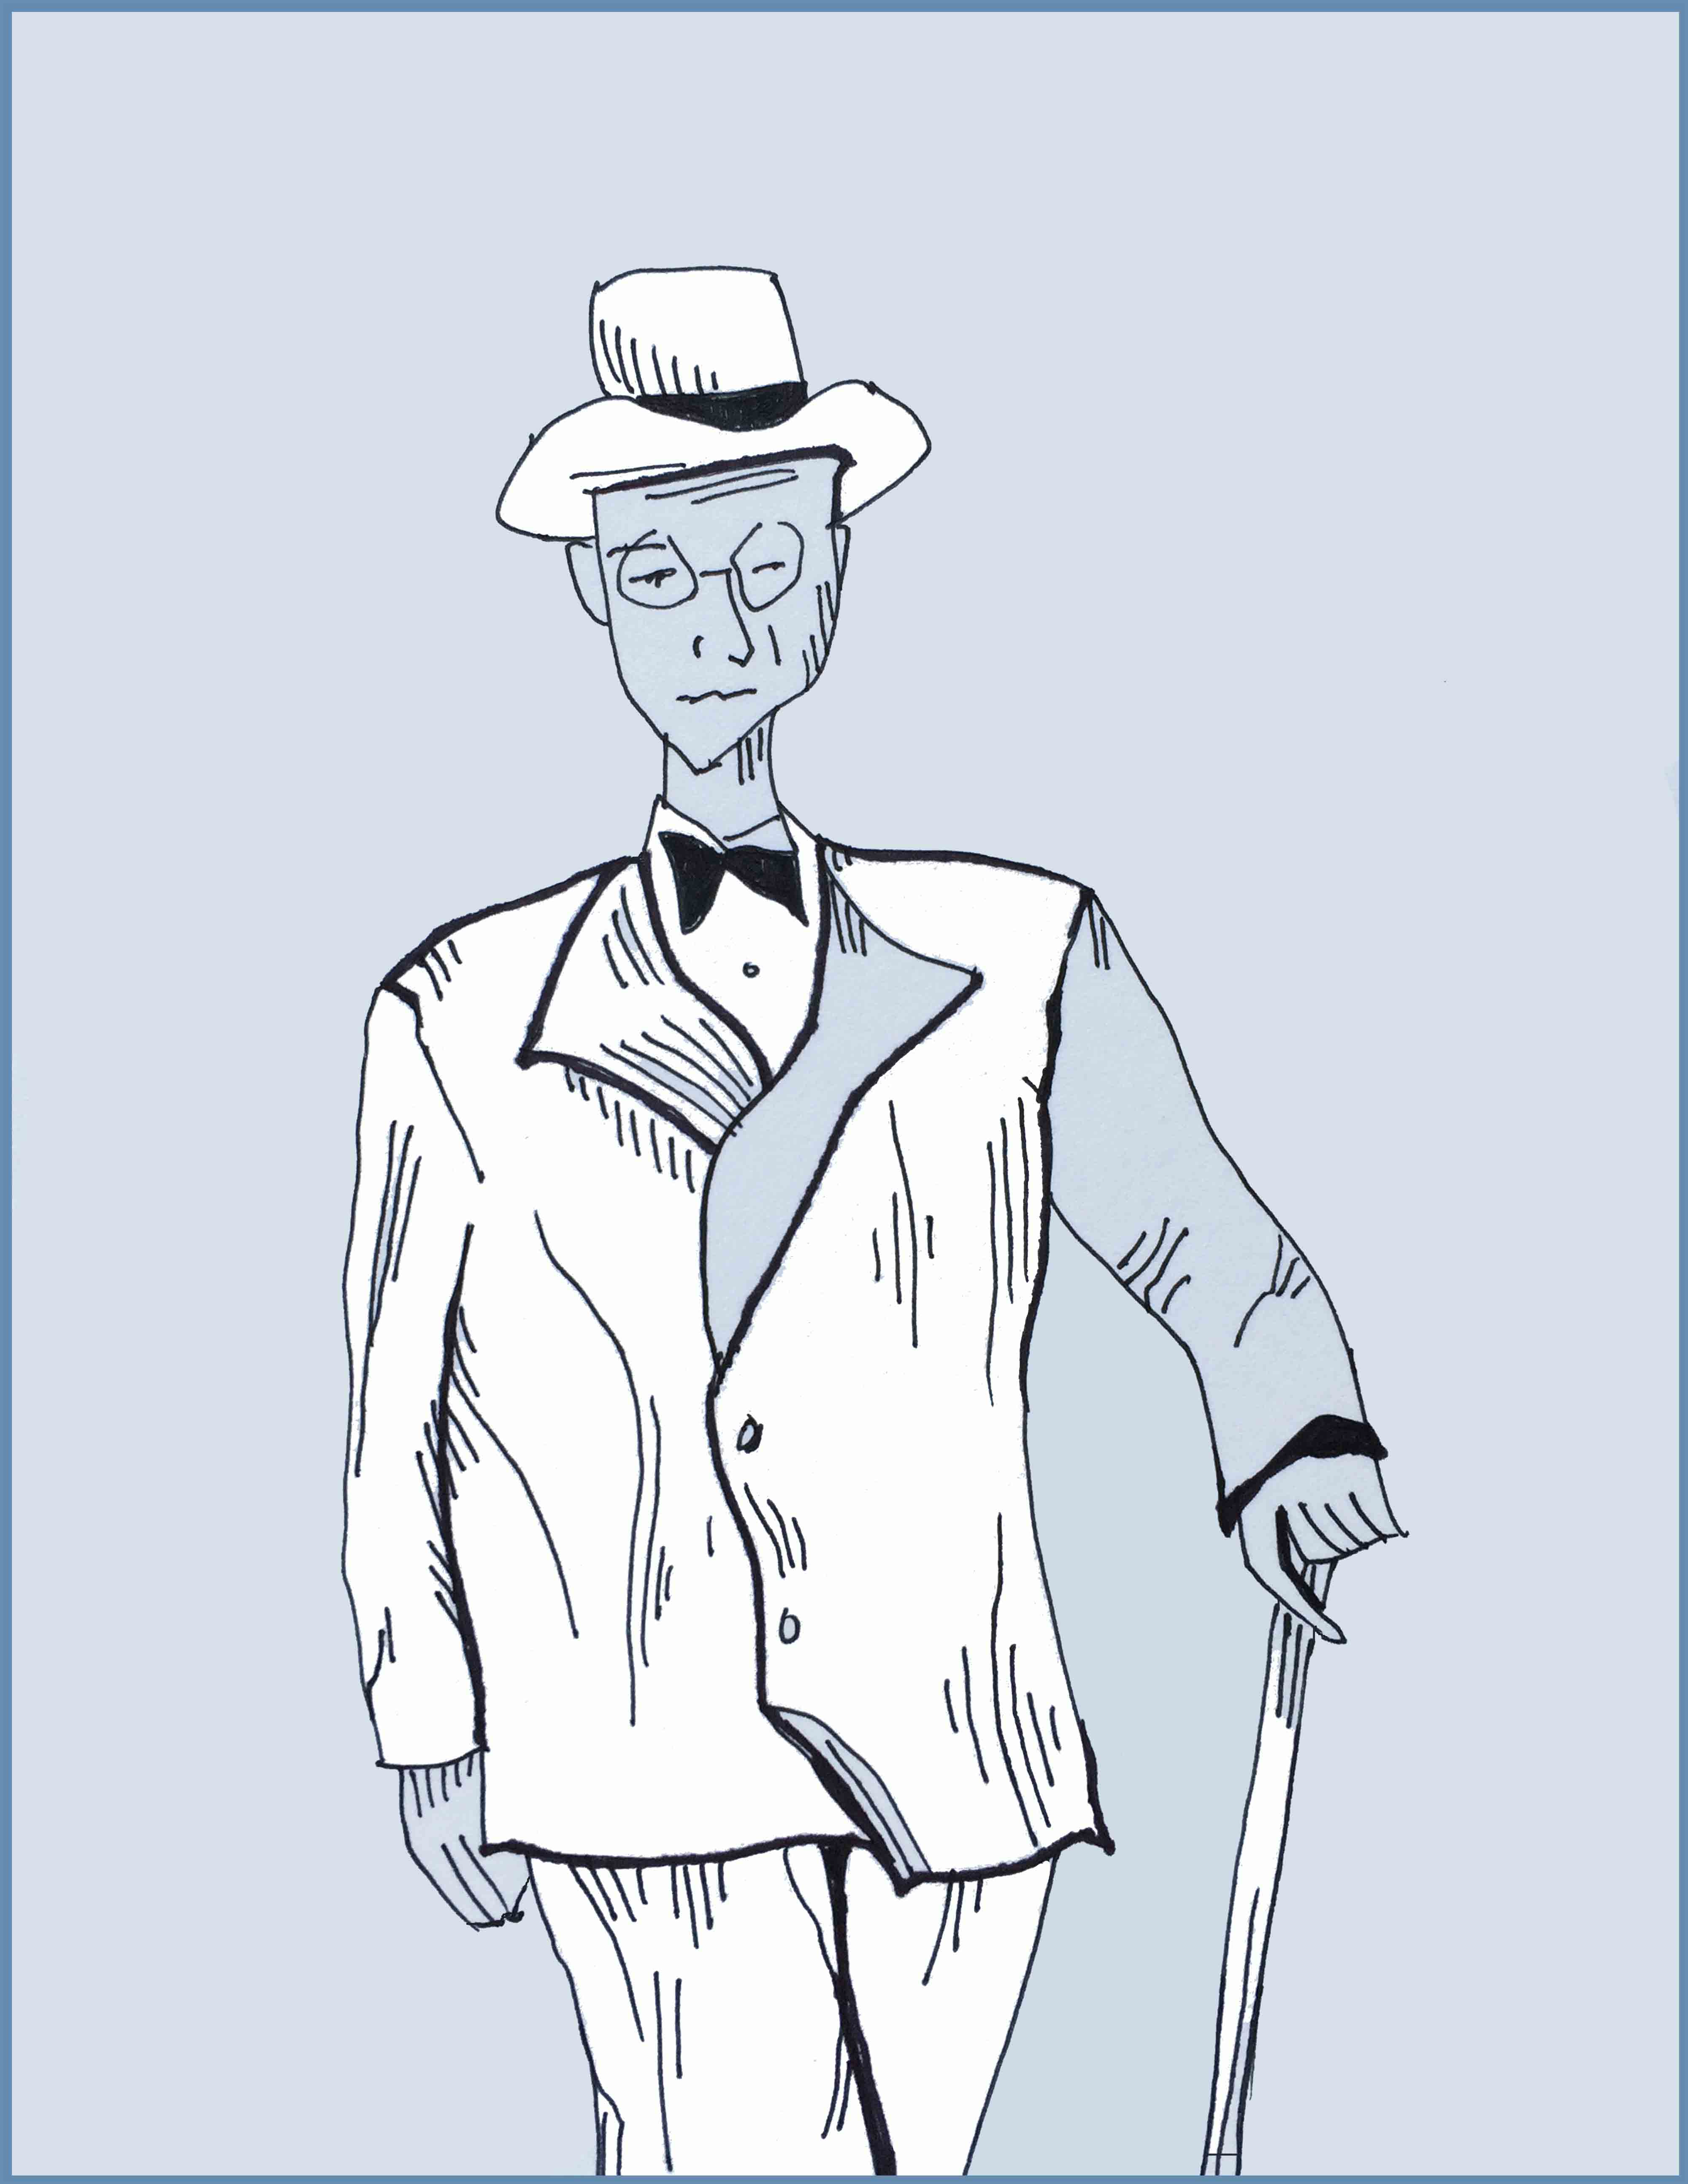 art every day number 37 / drawing / man with cane